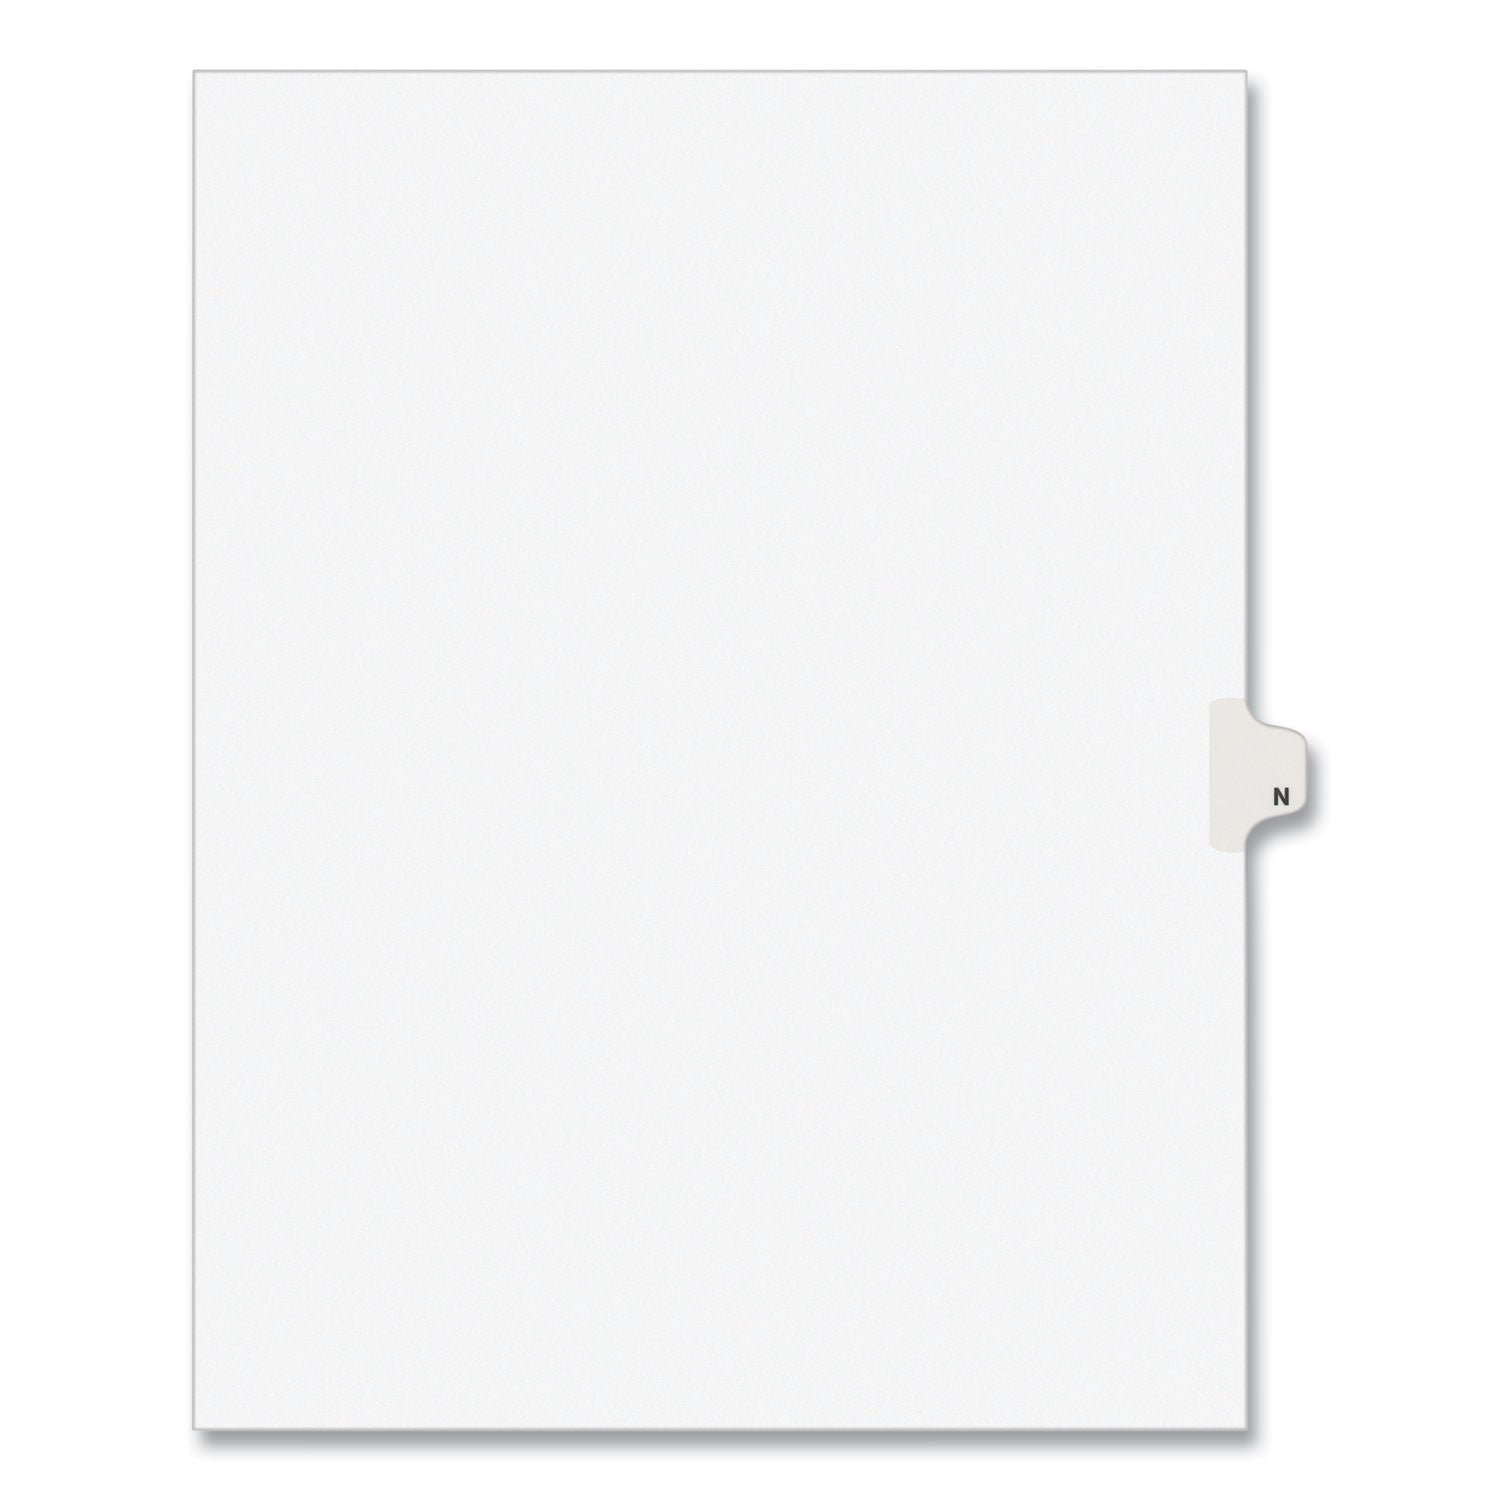 Preprinted Legal Exhibit Side Tab Index Dividers, Avery Style, 26-Tab, N, 11 x 8.5, White, 25/Pack, (1414) - 